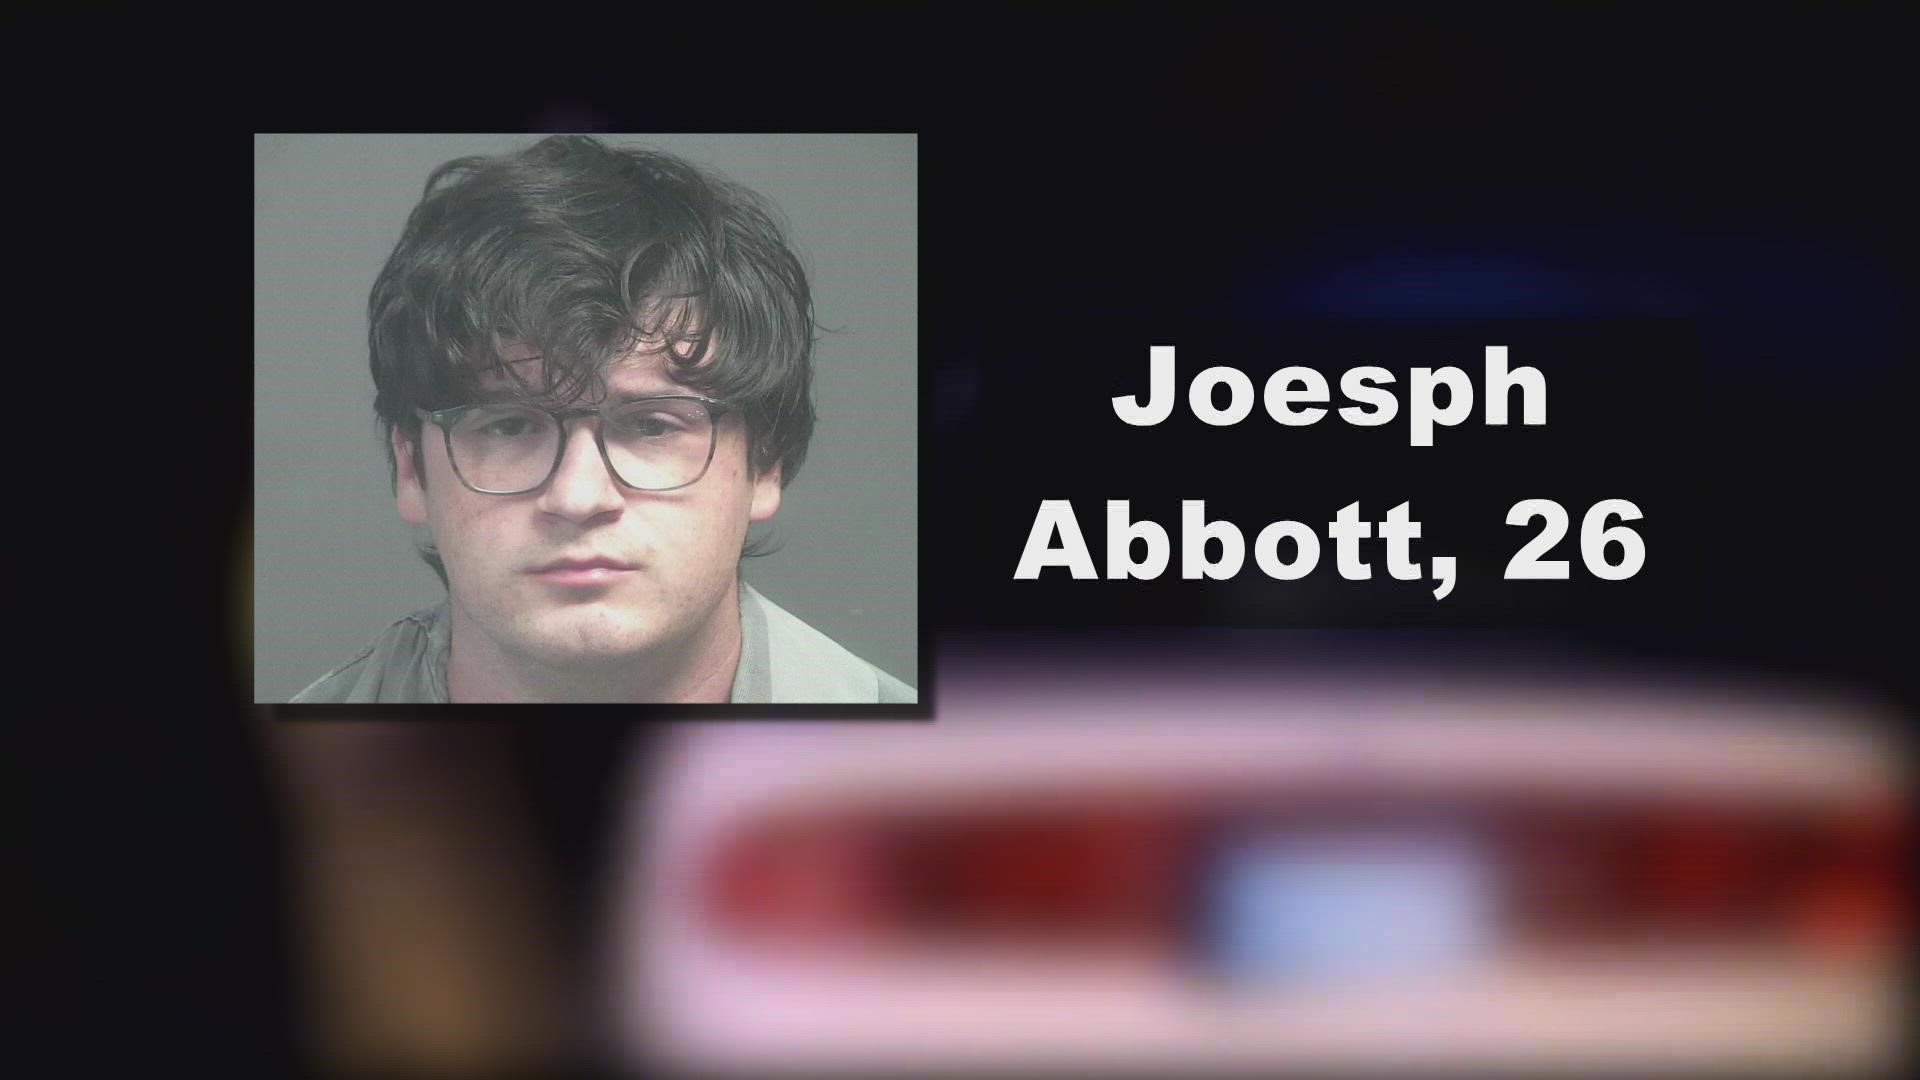 The Blount County Sheriff's Office said Tuesday that Joseph Kade Abbott, 26, was arrested in North Carolina and taken to the Blount County Detention Facility.